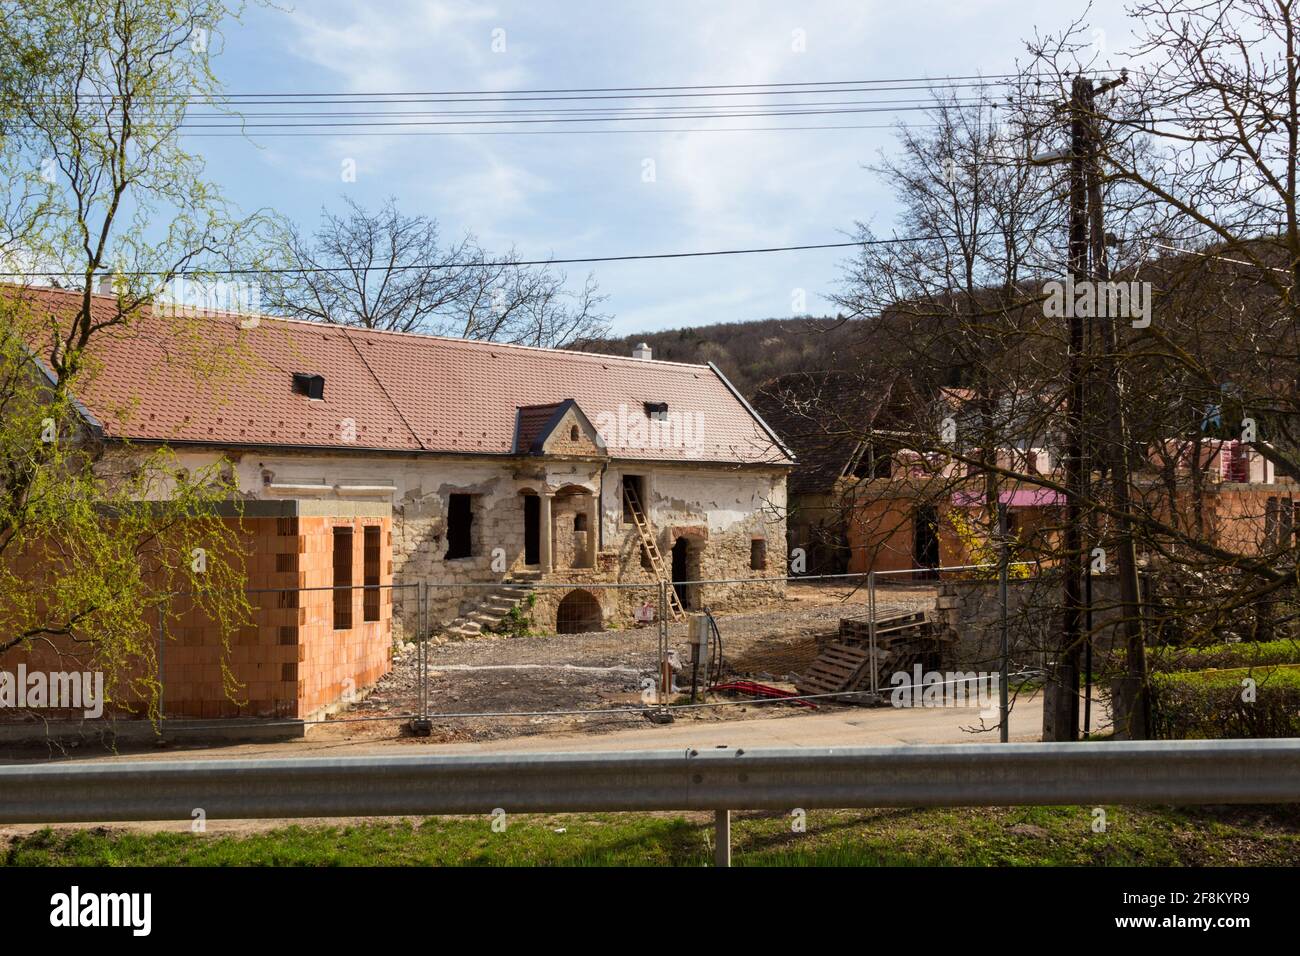 Renovating and rebuilding an old traditional rural house, construction site, Banfalva, Sopron, Hungary Stock Photo